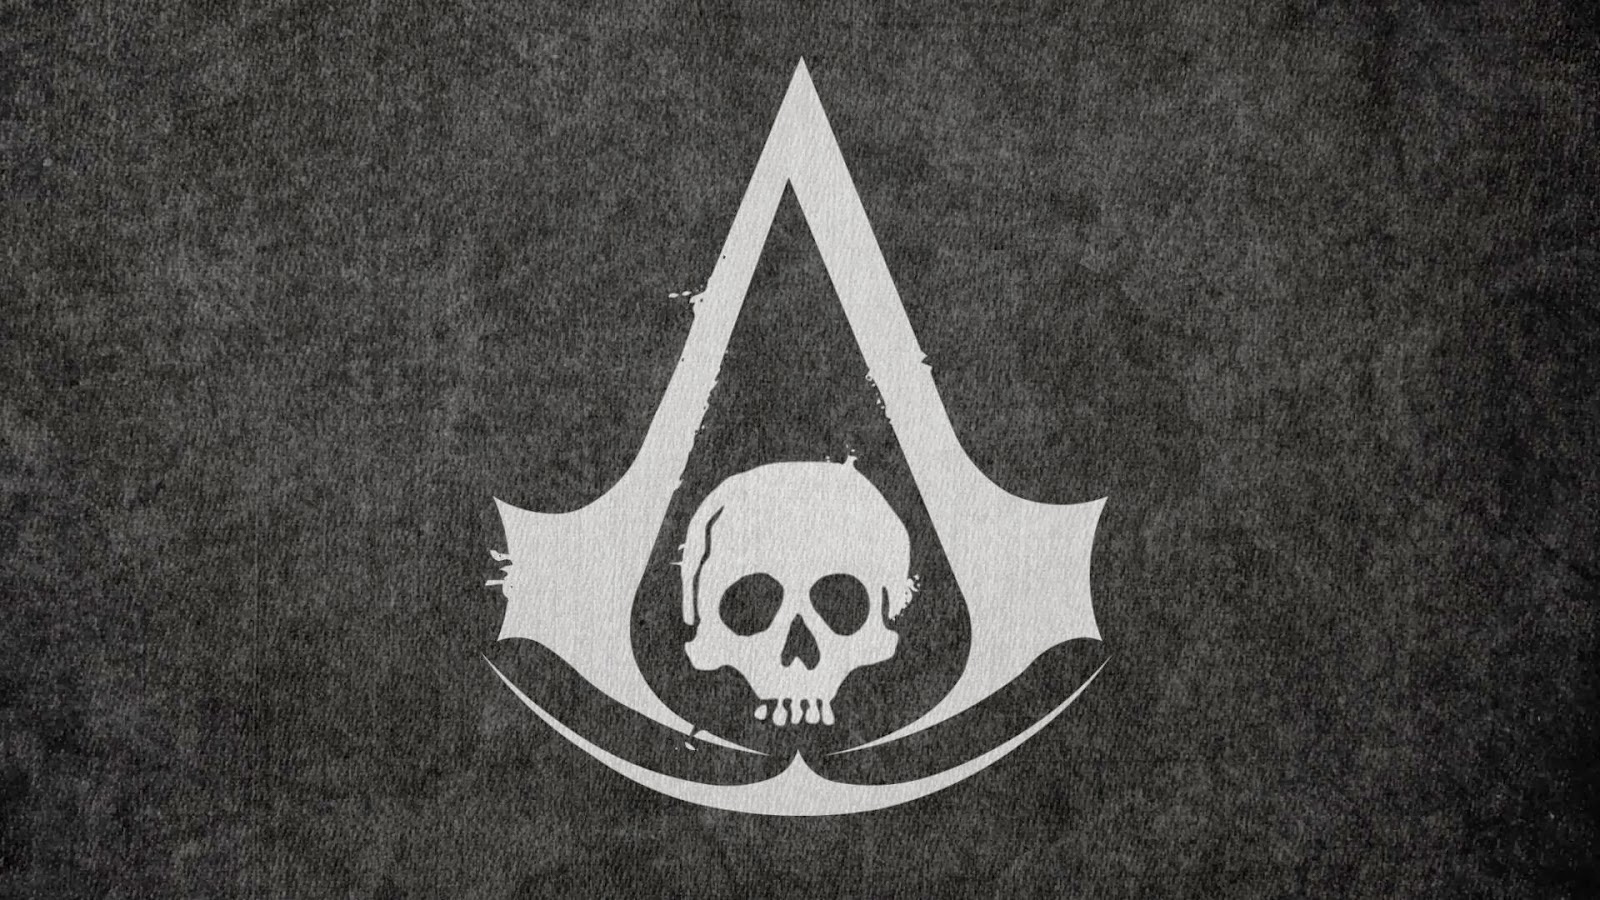 New Assassin S Creed Gameplay On Ps4 Air Assassinations And Going